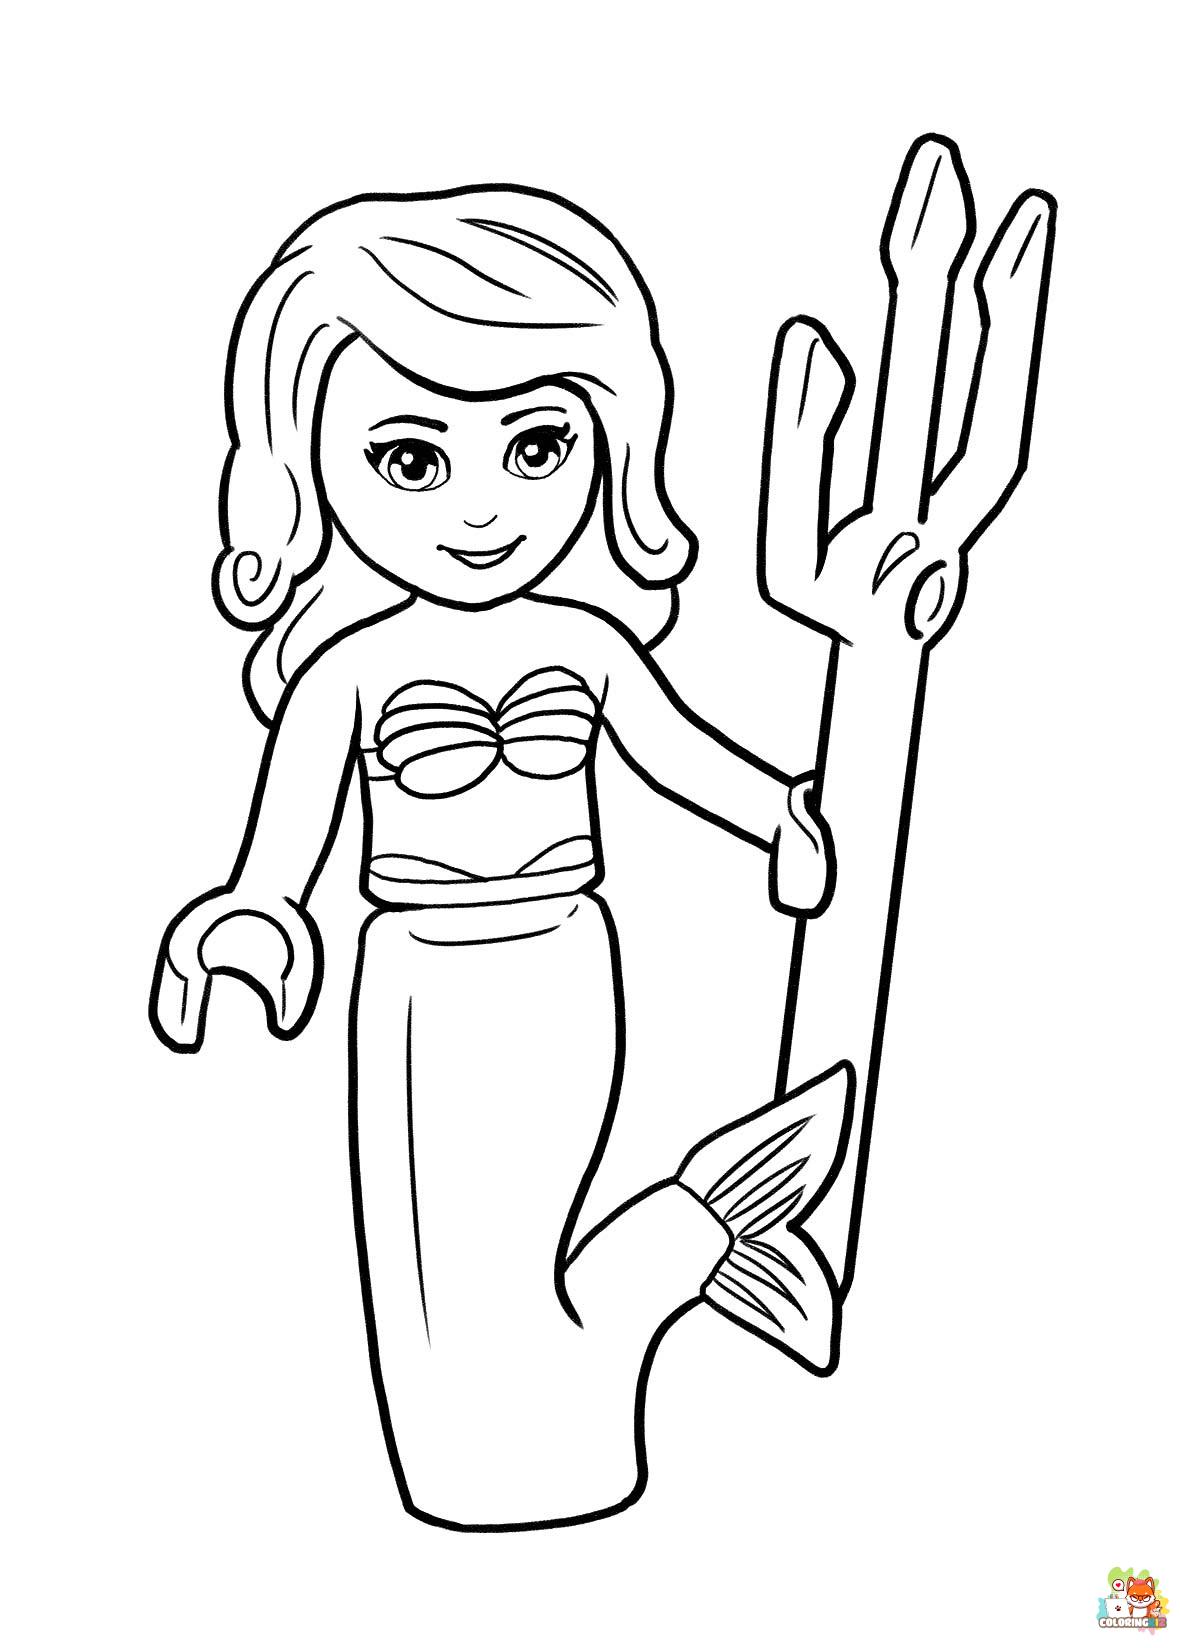 Lego Princess Coloring Pages 3